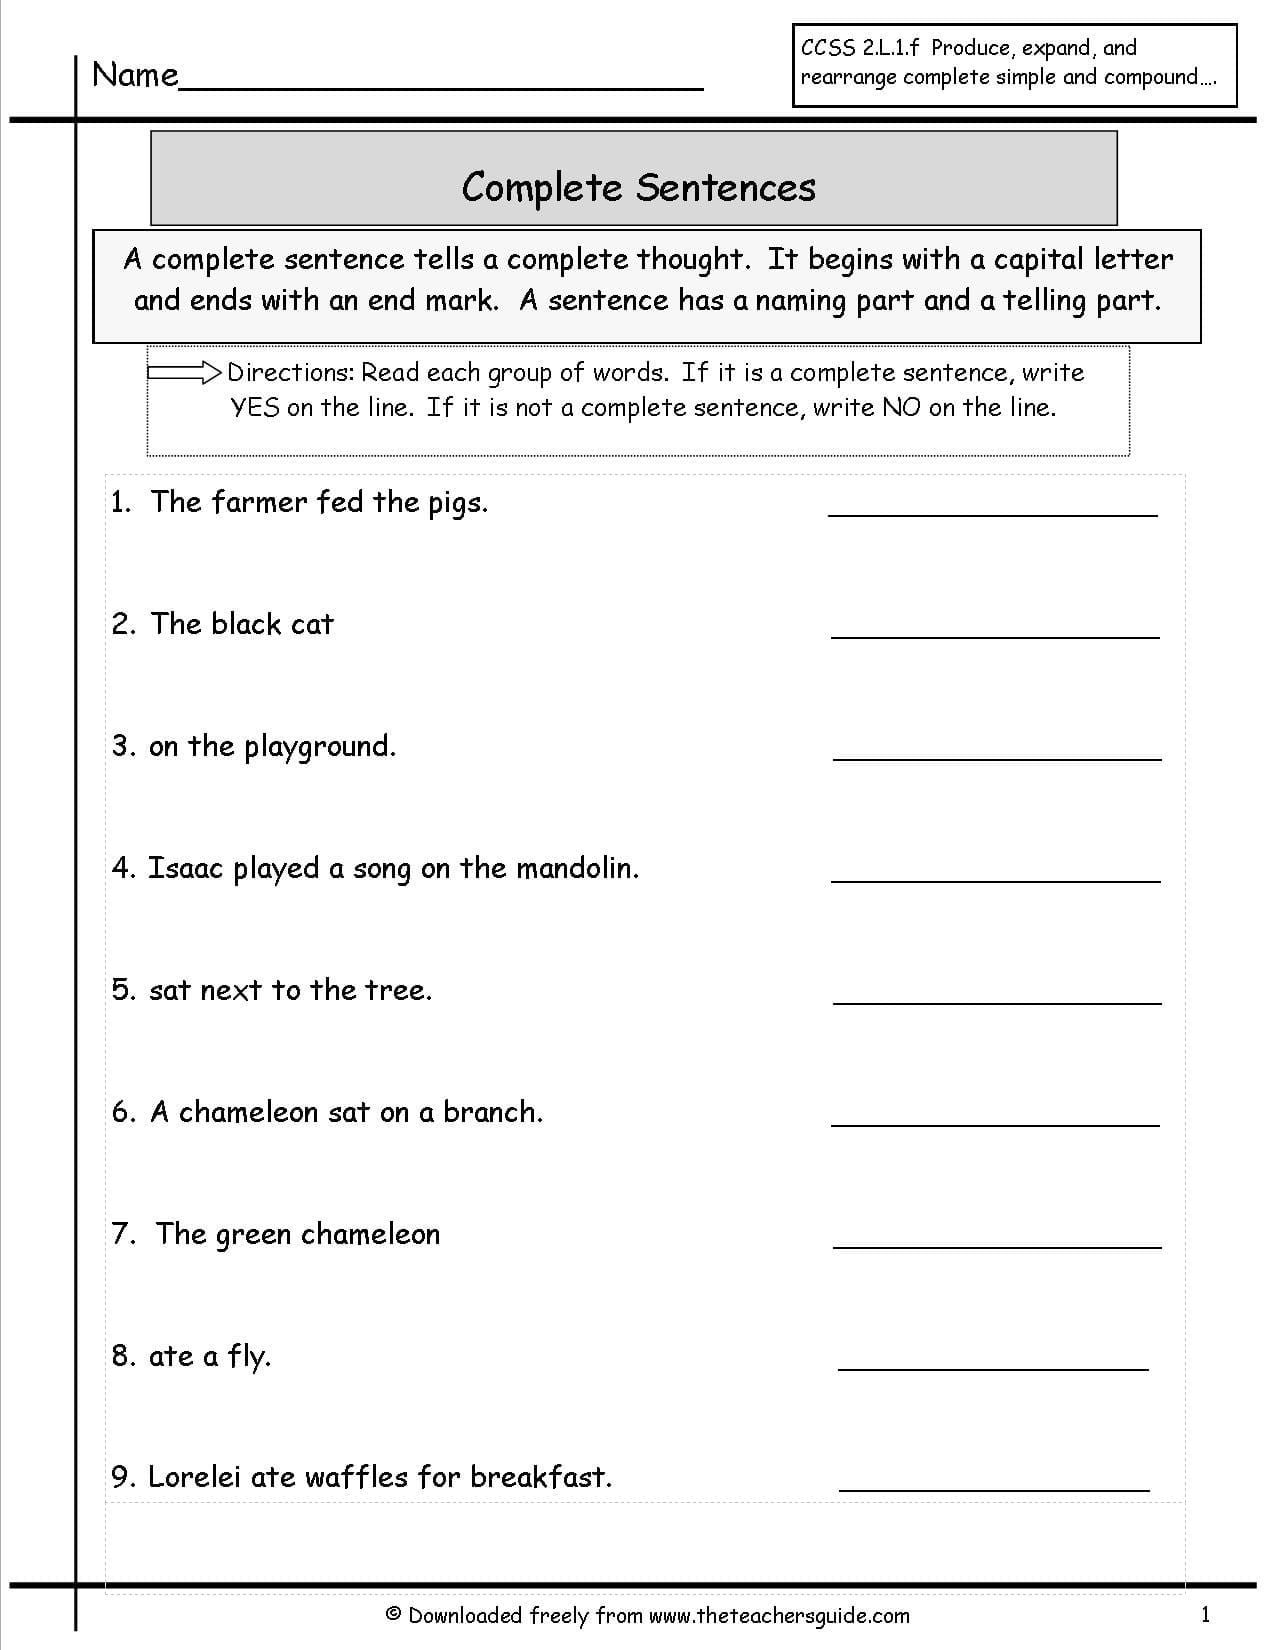 order-of-sentences-worksheets-assignmenthelp-db-excel